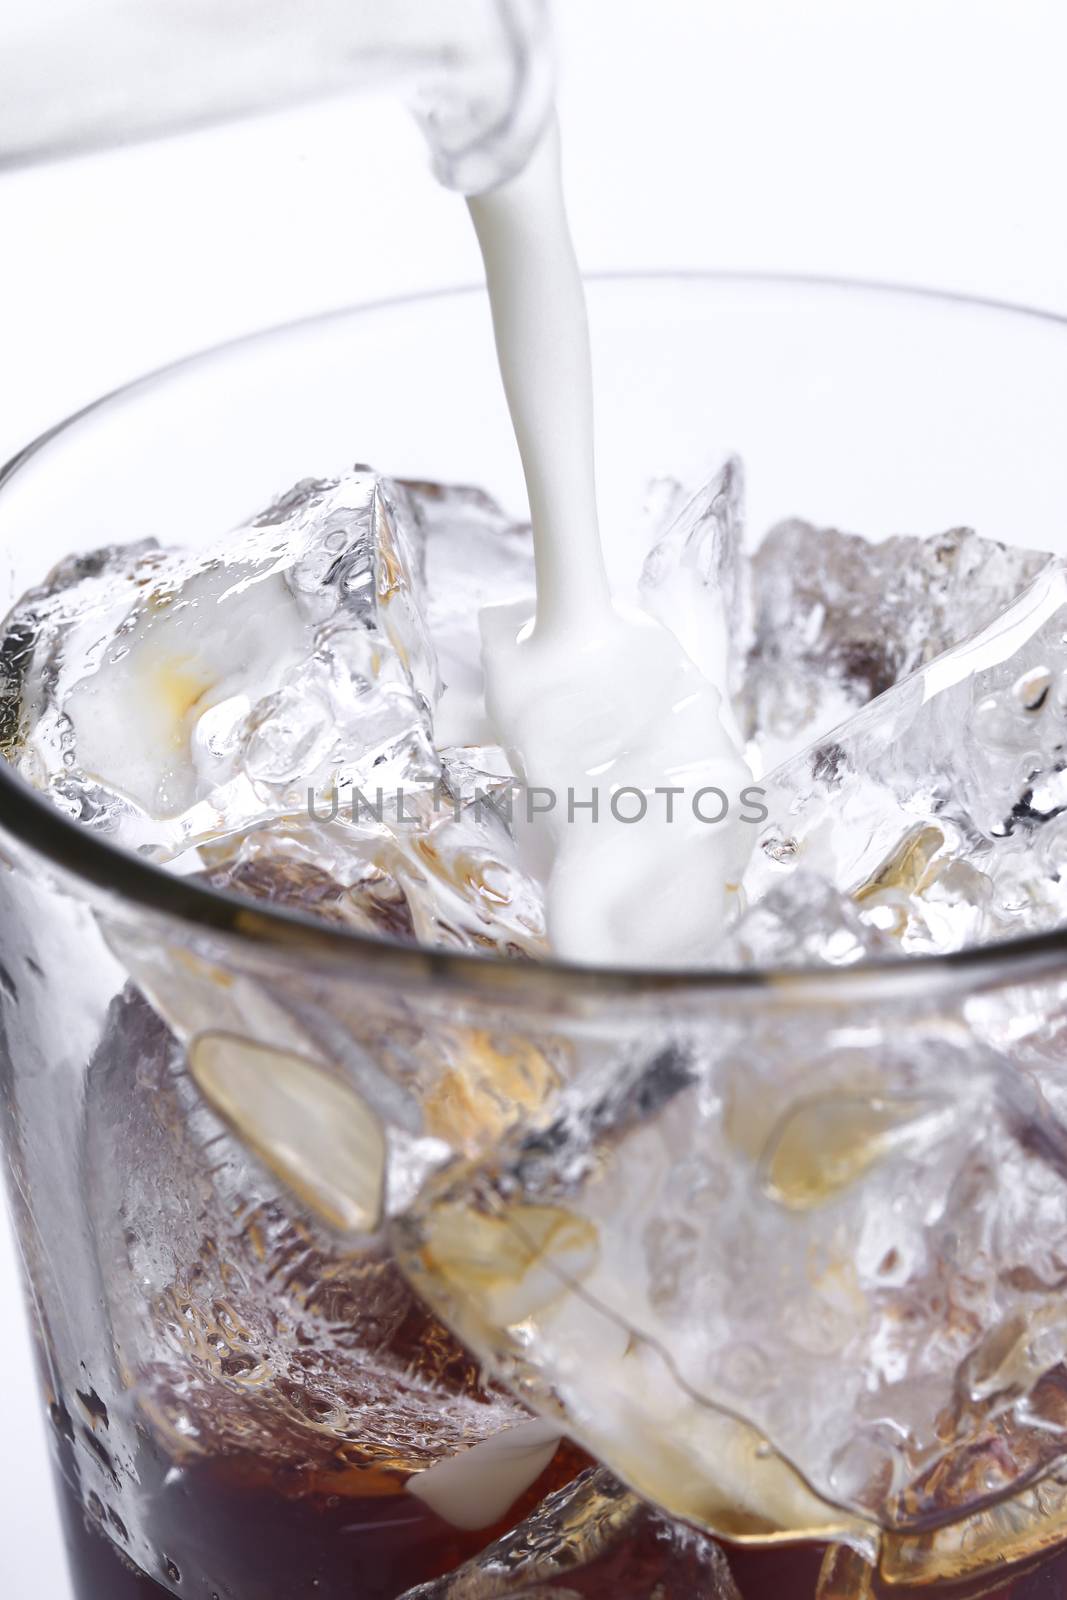 Glass of cold coffee on a white background